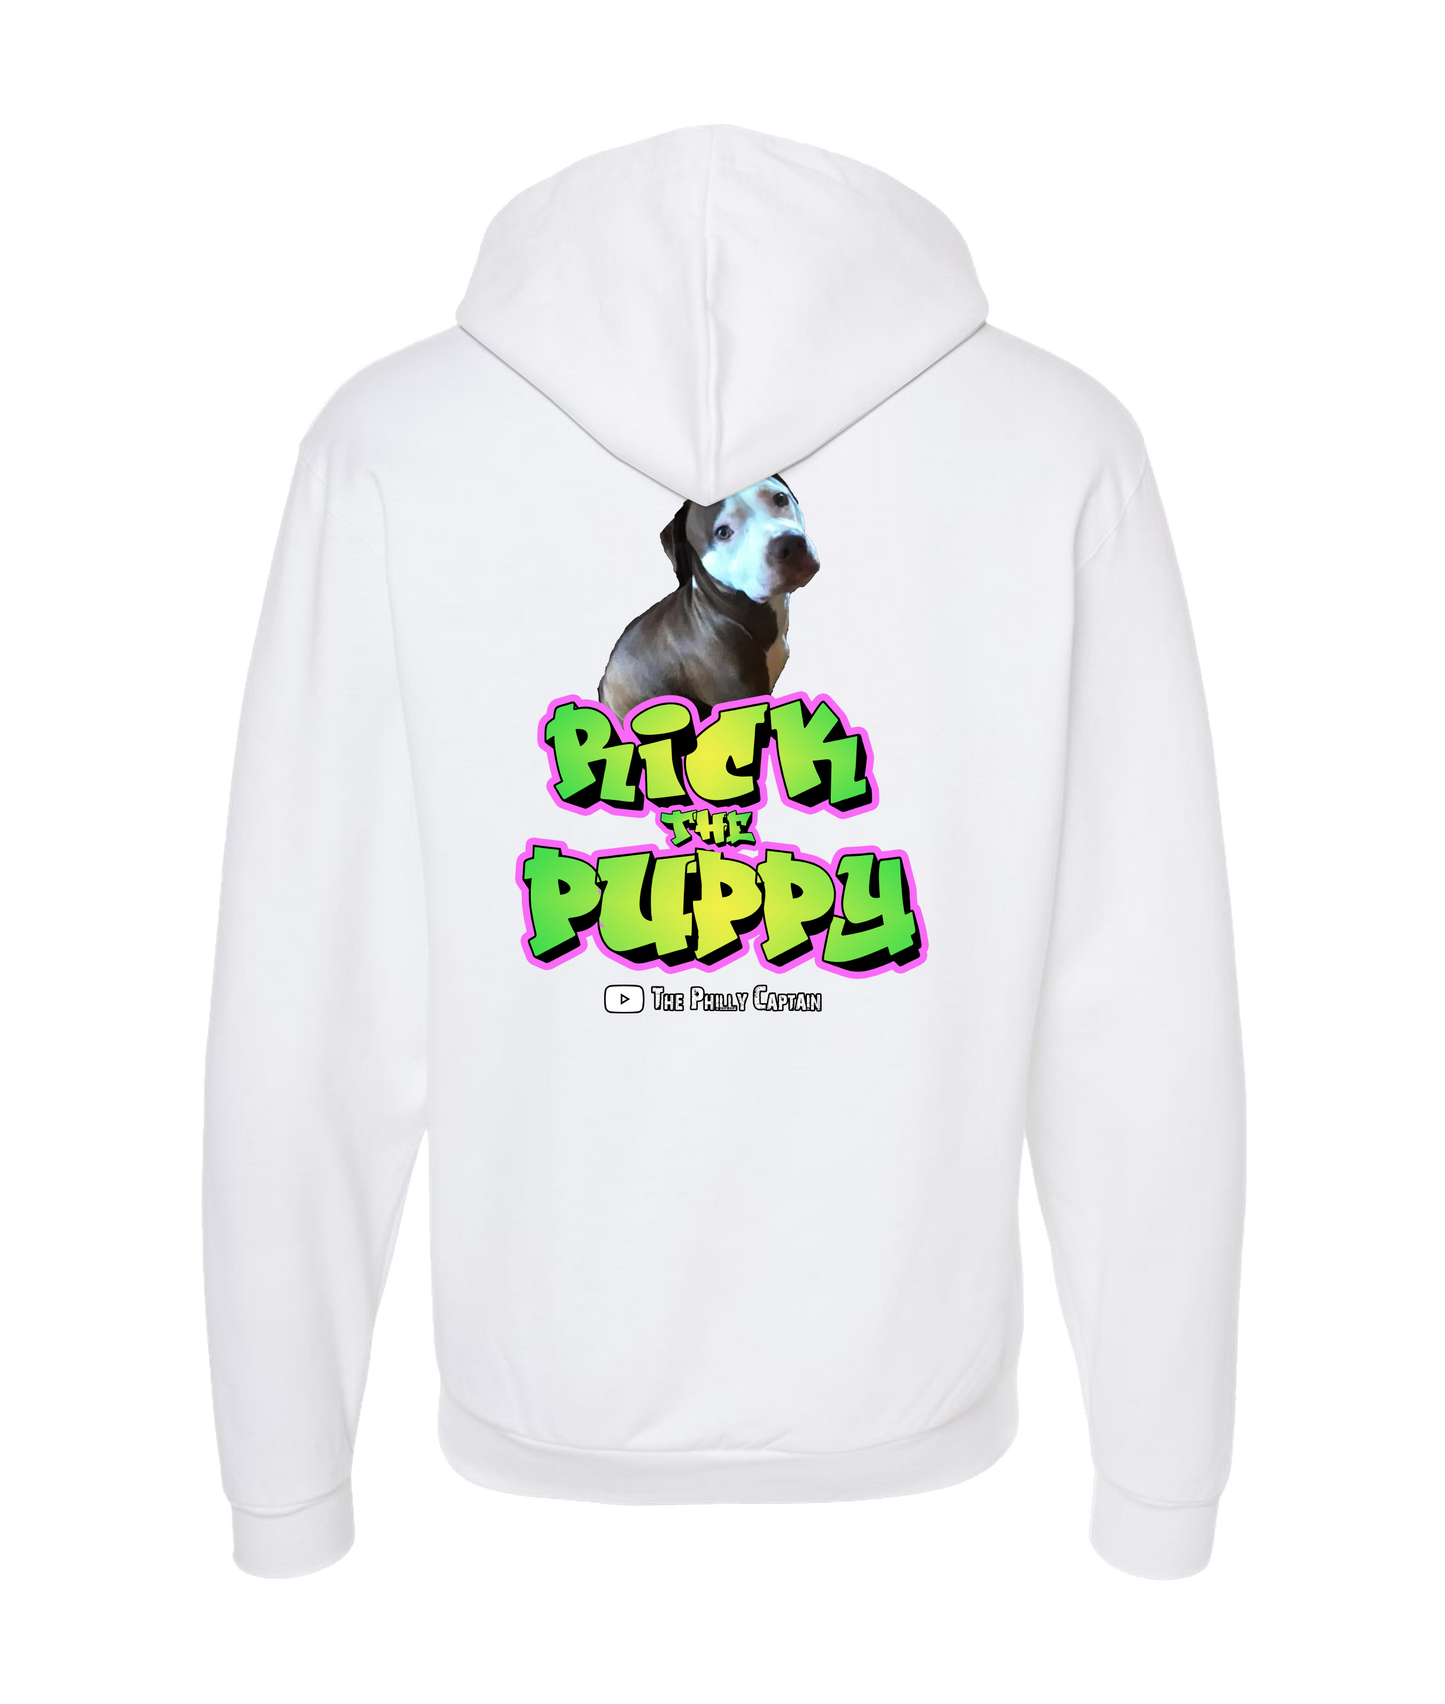 The Philly Captain's Merch is Fire - Rick the Puppy - White Zip Up Hoodie